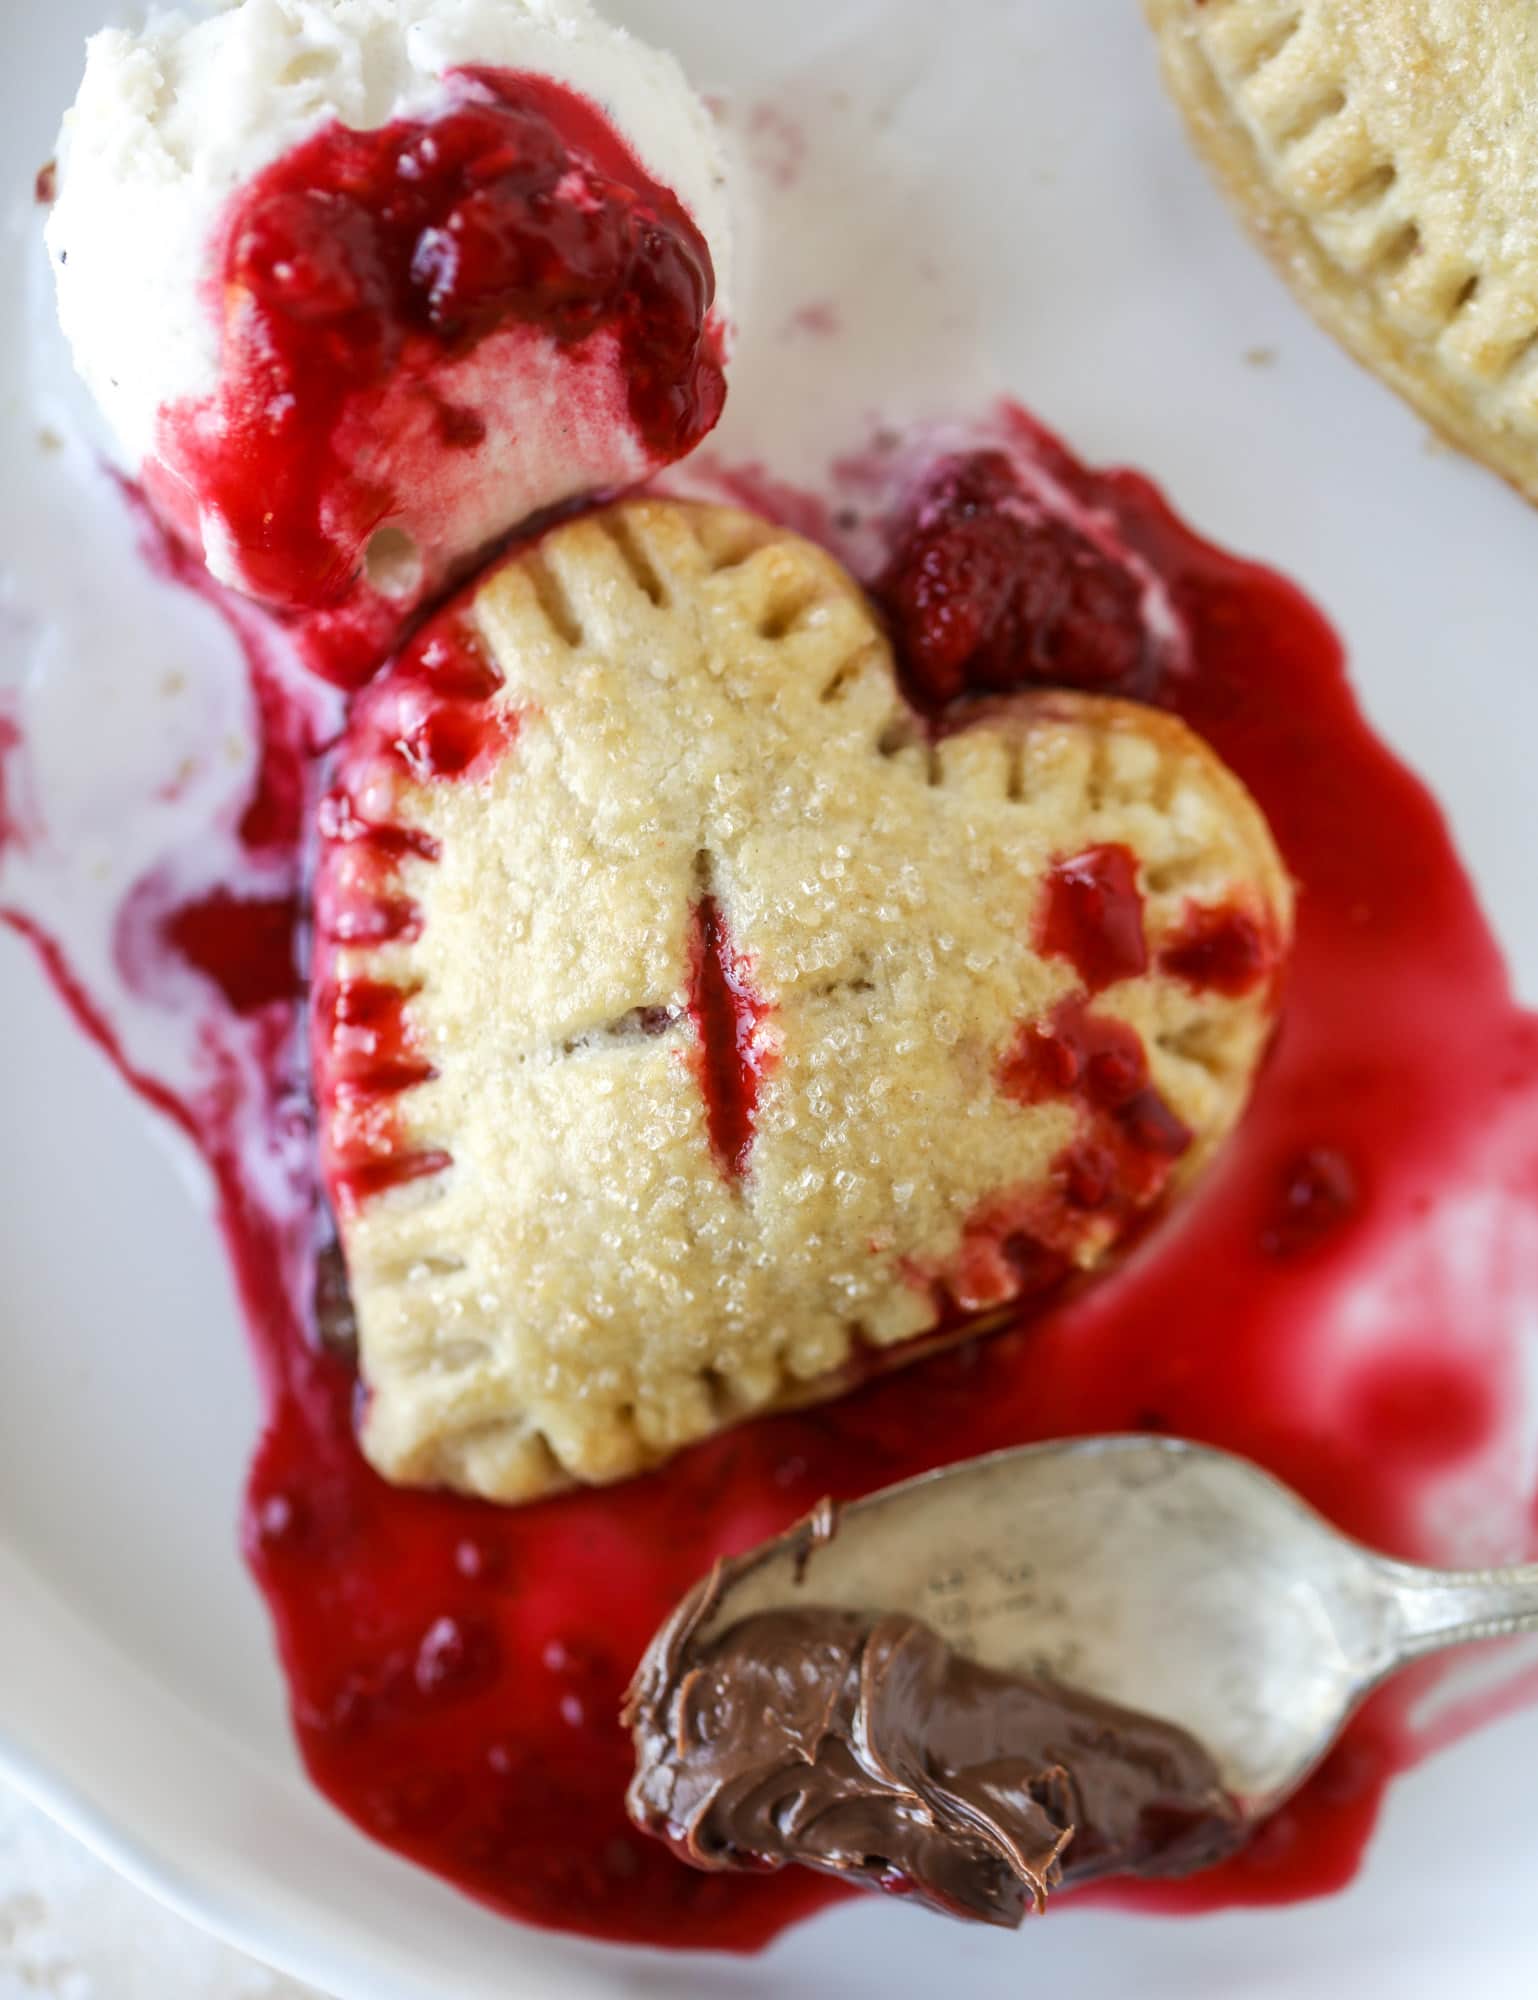 20 of my favorite recipes for Valentine's Day